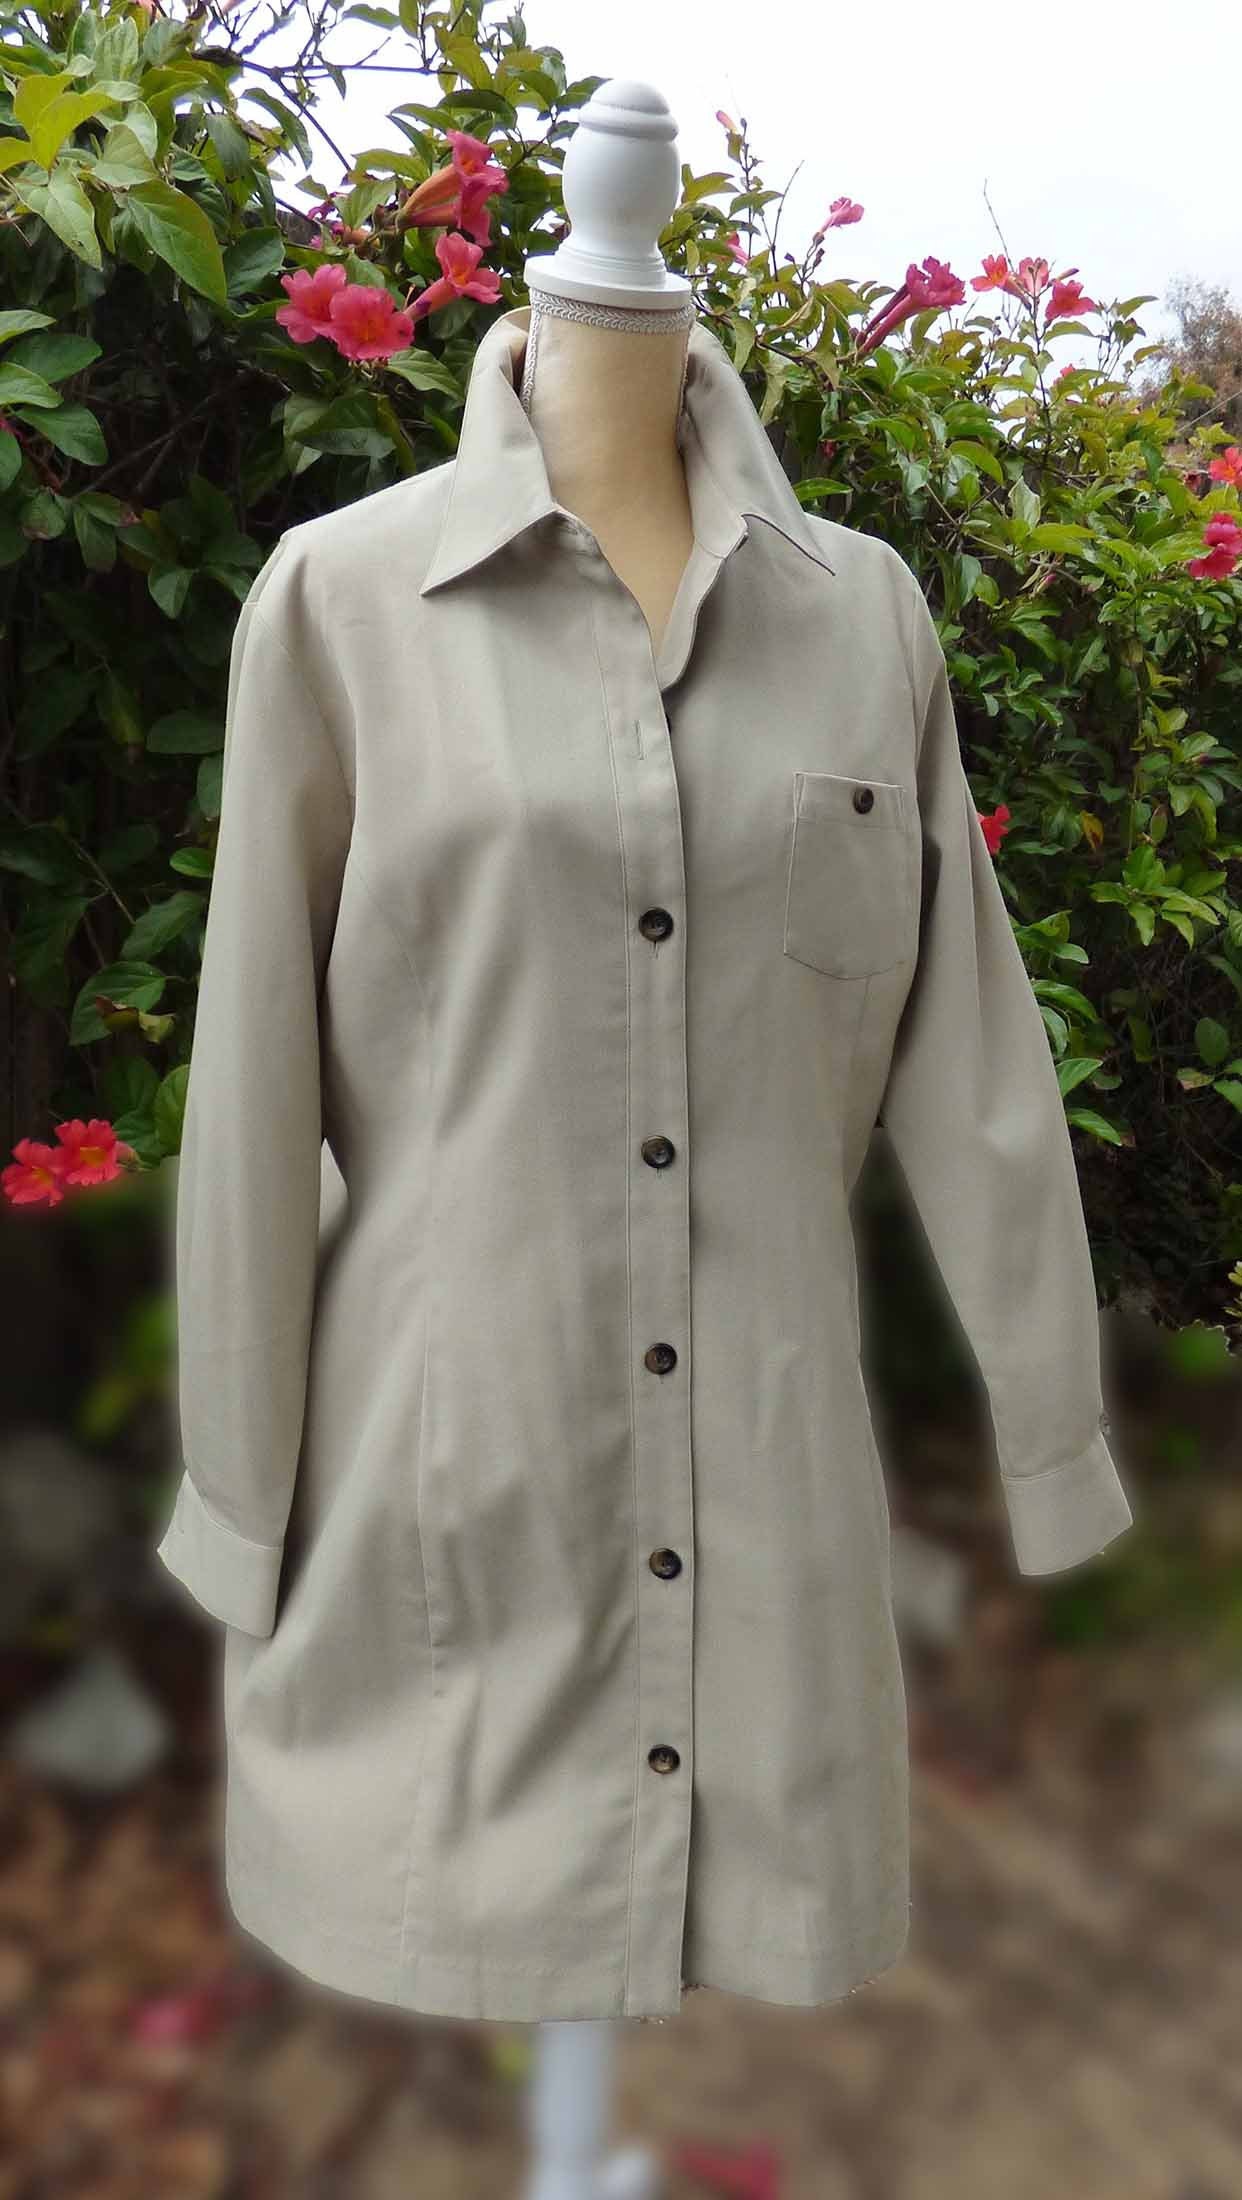 Vintage Travelsmith Khaki Wool Blend Shirt Dress Size 12 Rn 94407 Worn Open Or Closed Ideal For Tonal Layered Look